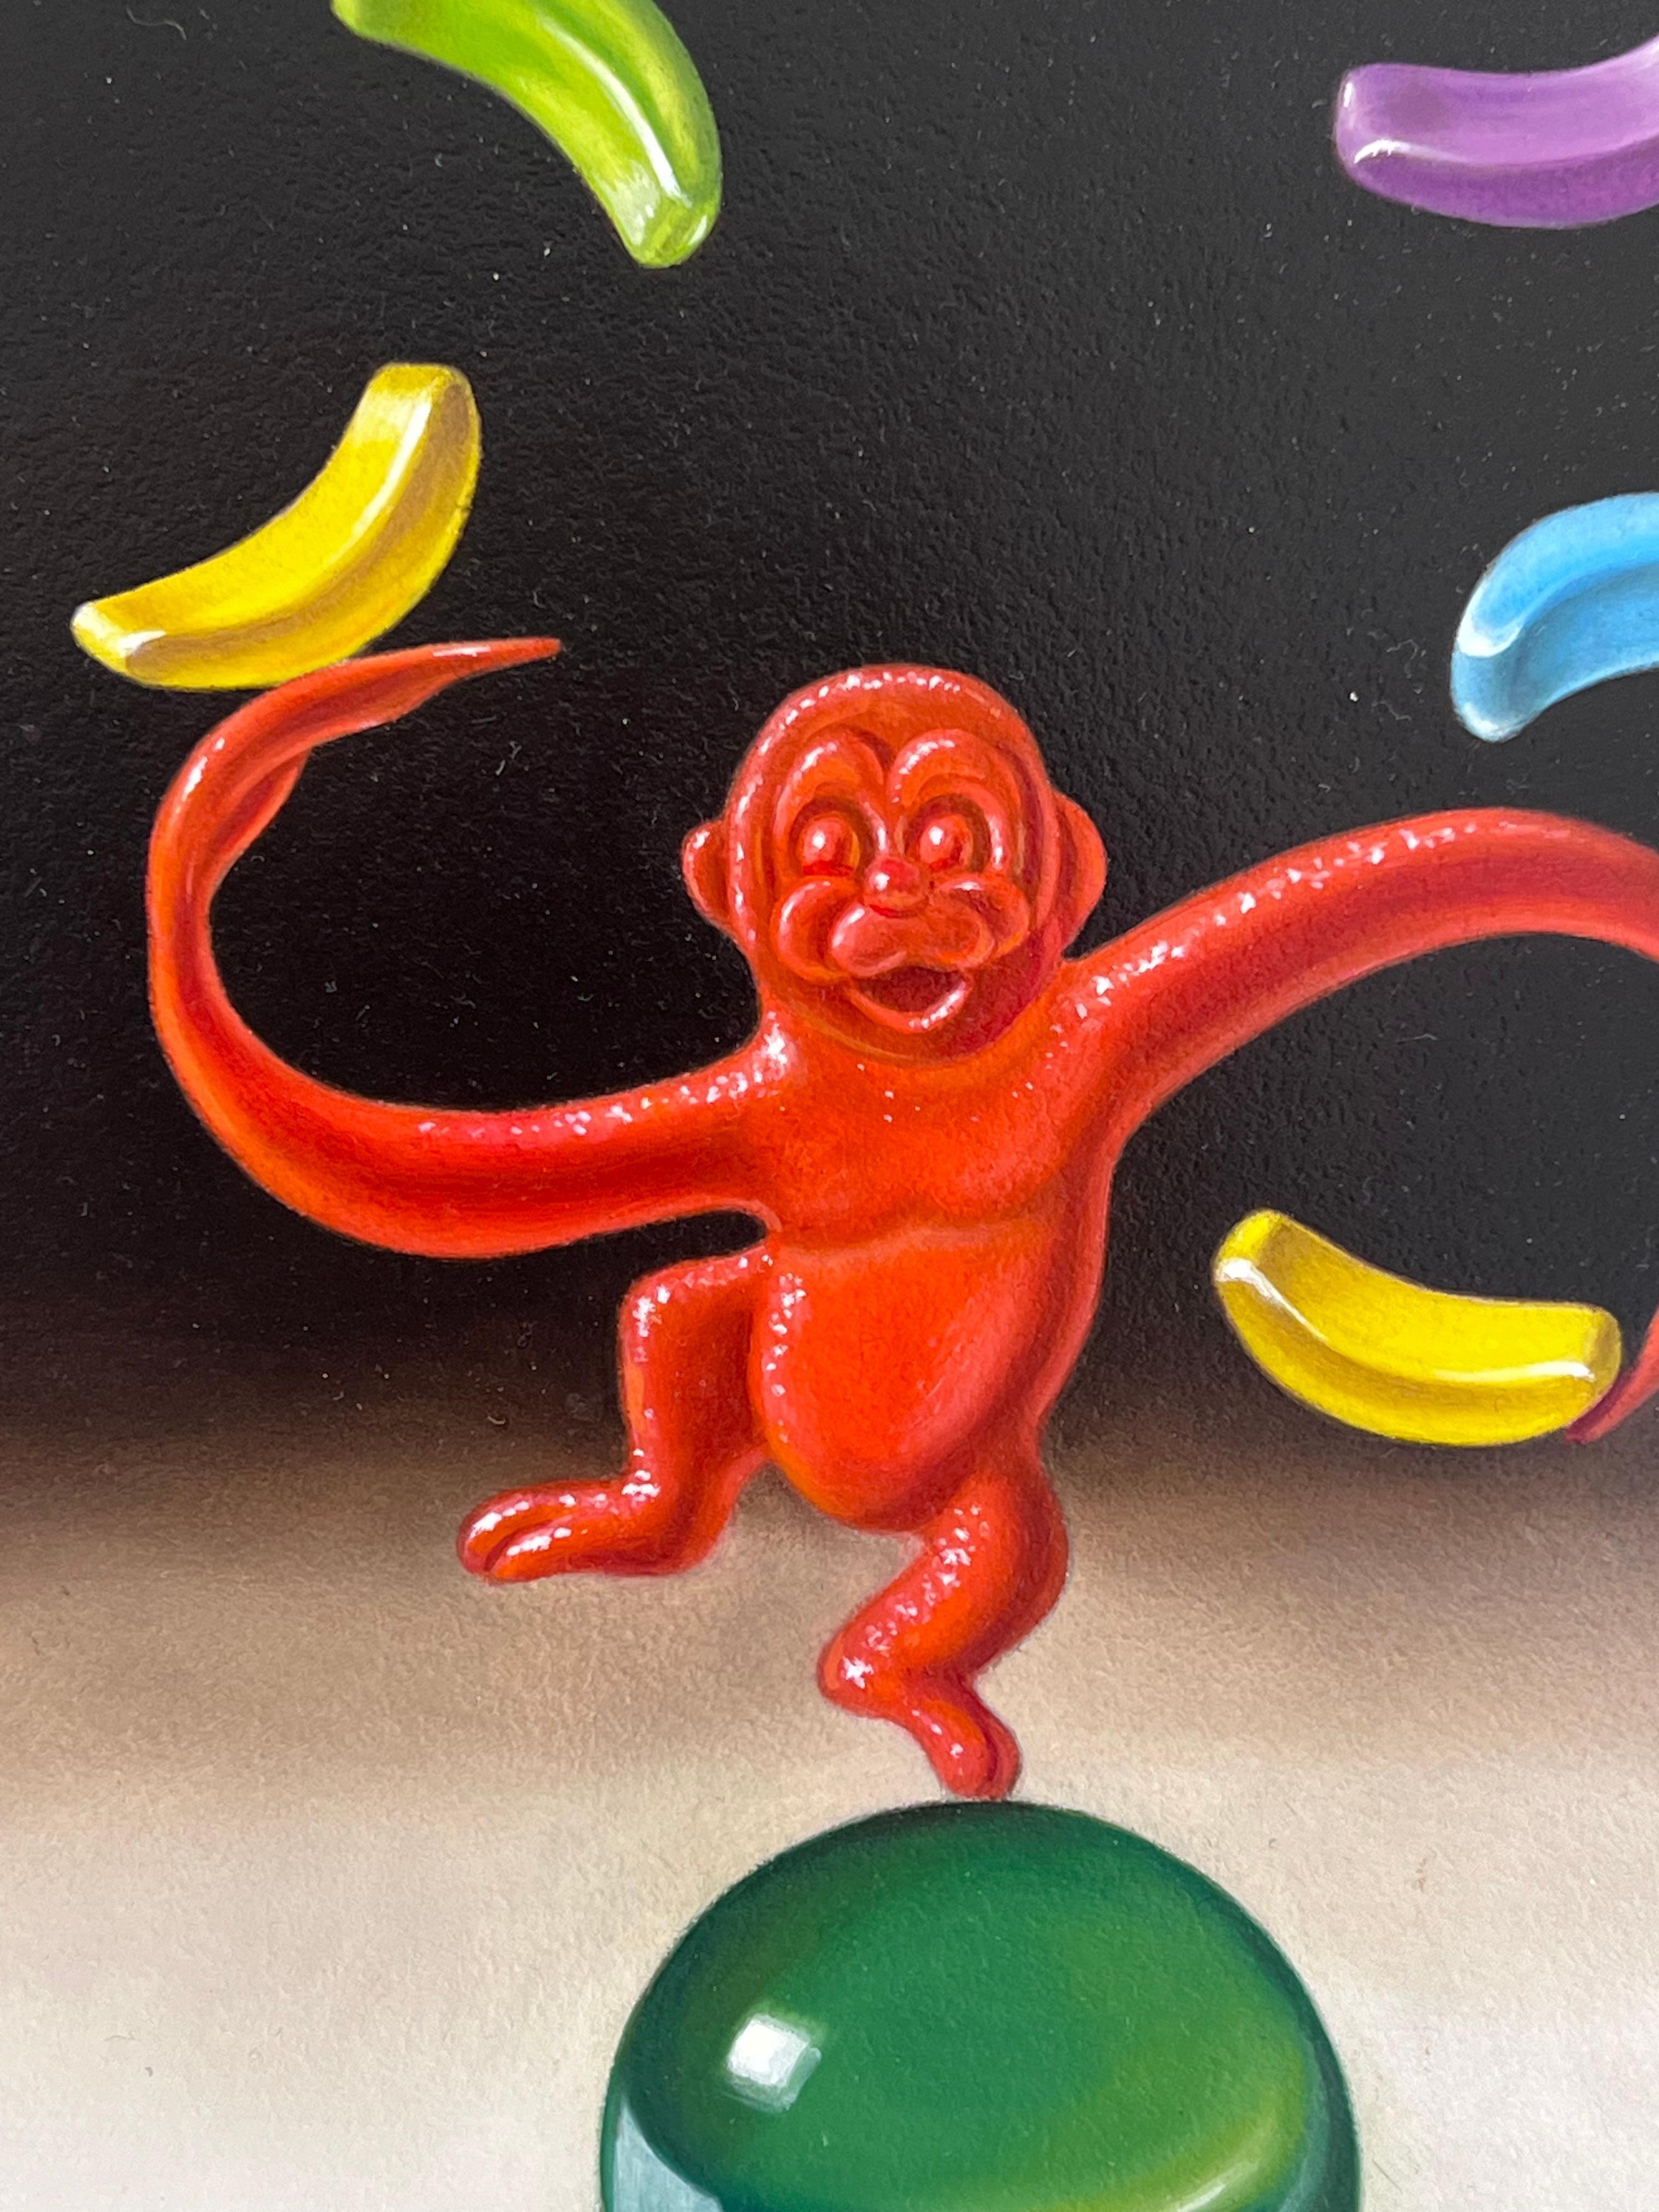 In “Monkey Around,” George A. Gonzalez transports the viewer into a whimsical world where imagination knows no bounds. At the center of the canvas, a vibrant red monkey with elongated limbs stands precariously on one leg atop a glass ball. With